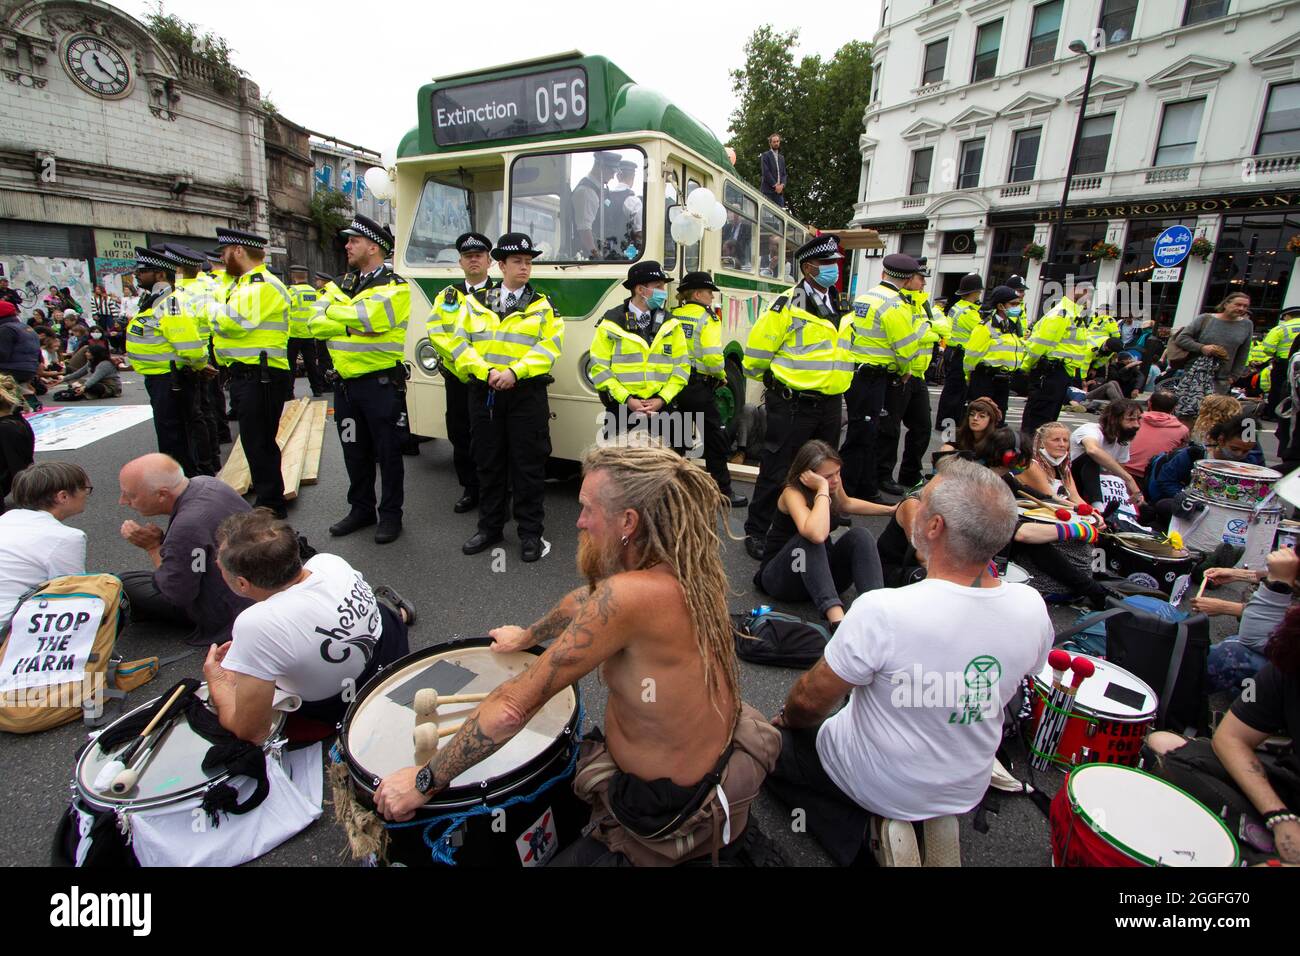 Extinction Rebellion activists London 31 August 2021. Protesters block London Bridge with a bus as part of ongoing XR, protests in London, while police officers guard bus Stock Photo